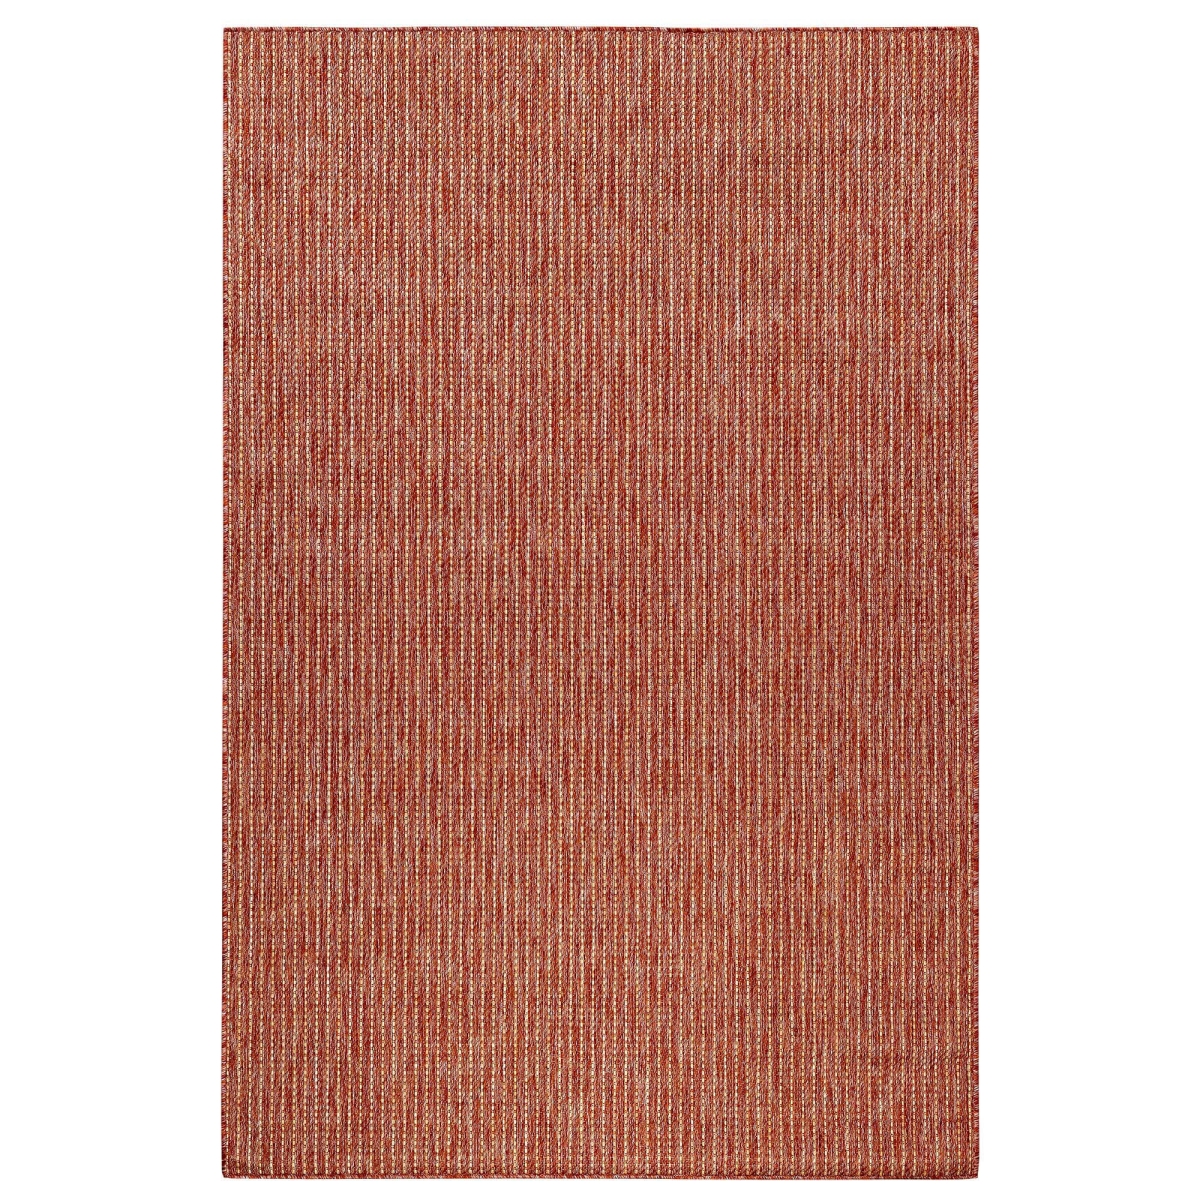 Trans-ocean Imports Cre45842224 39 In. X 59 In. Liora Manne Carmel Texture Stripe Indoor & Outdoor Wilton Woven Rectangle Rug - Red